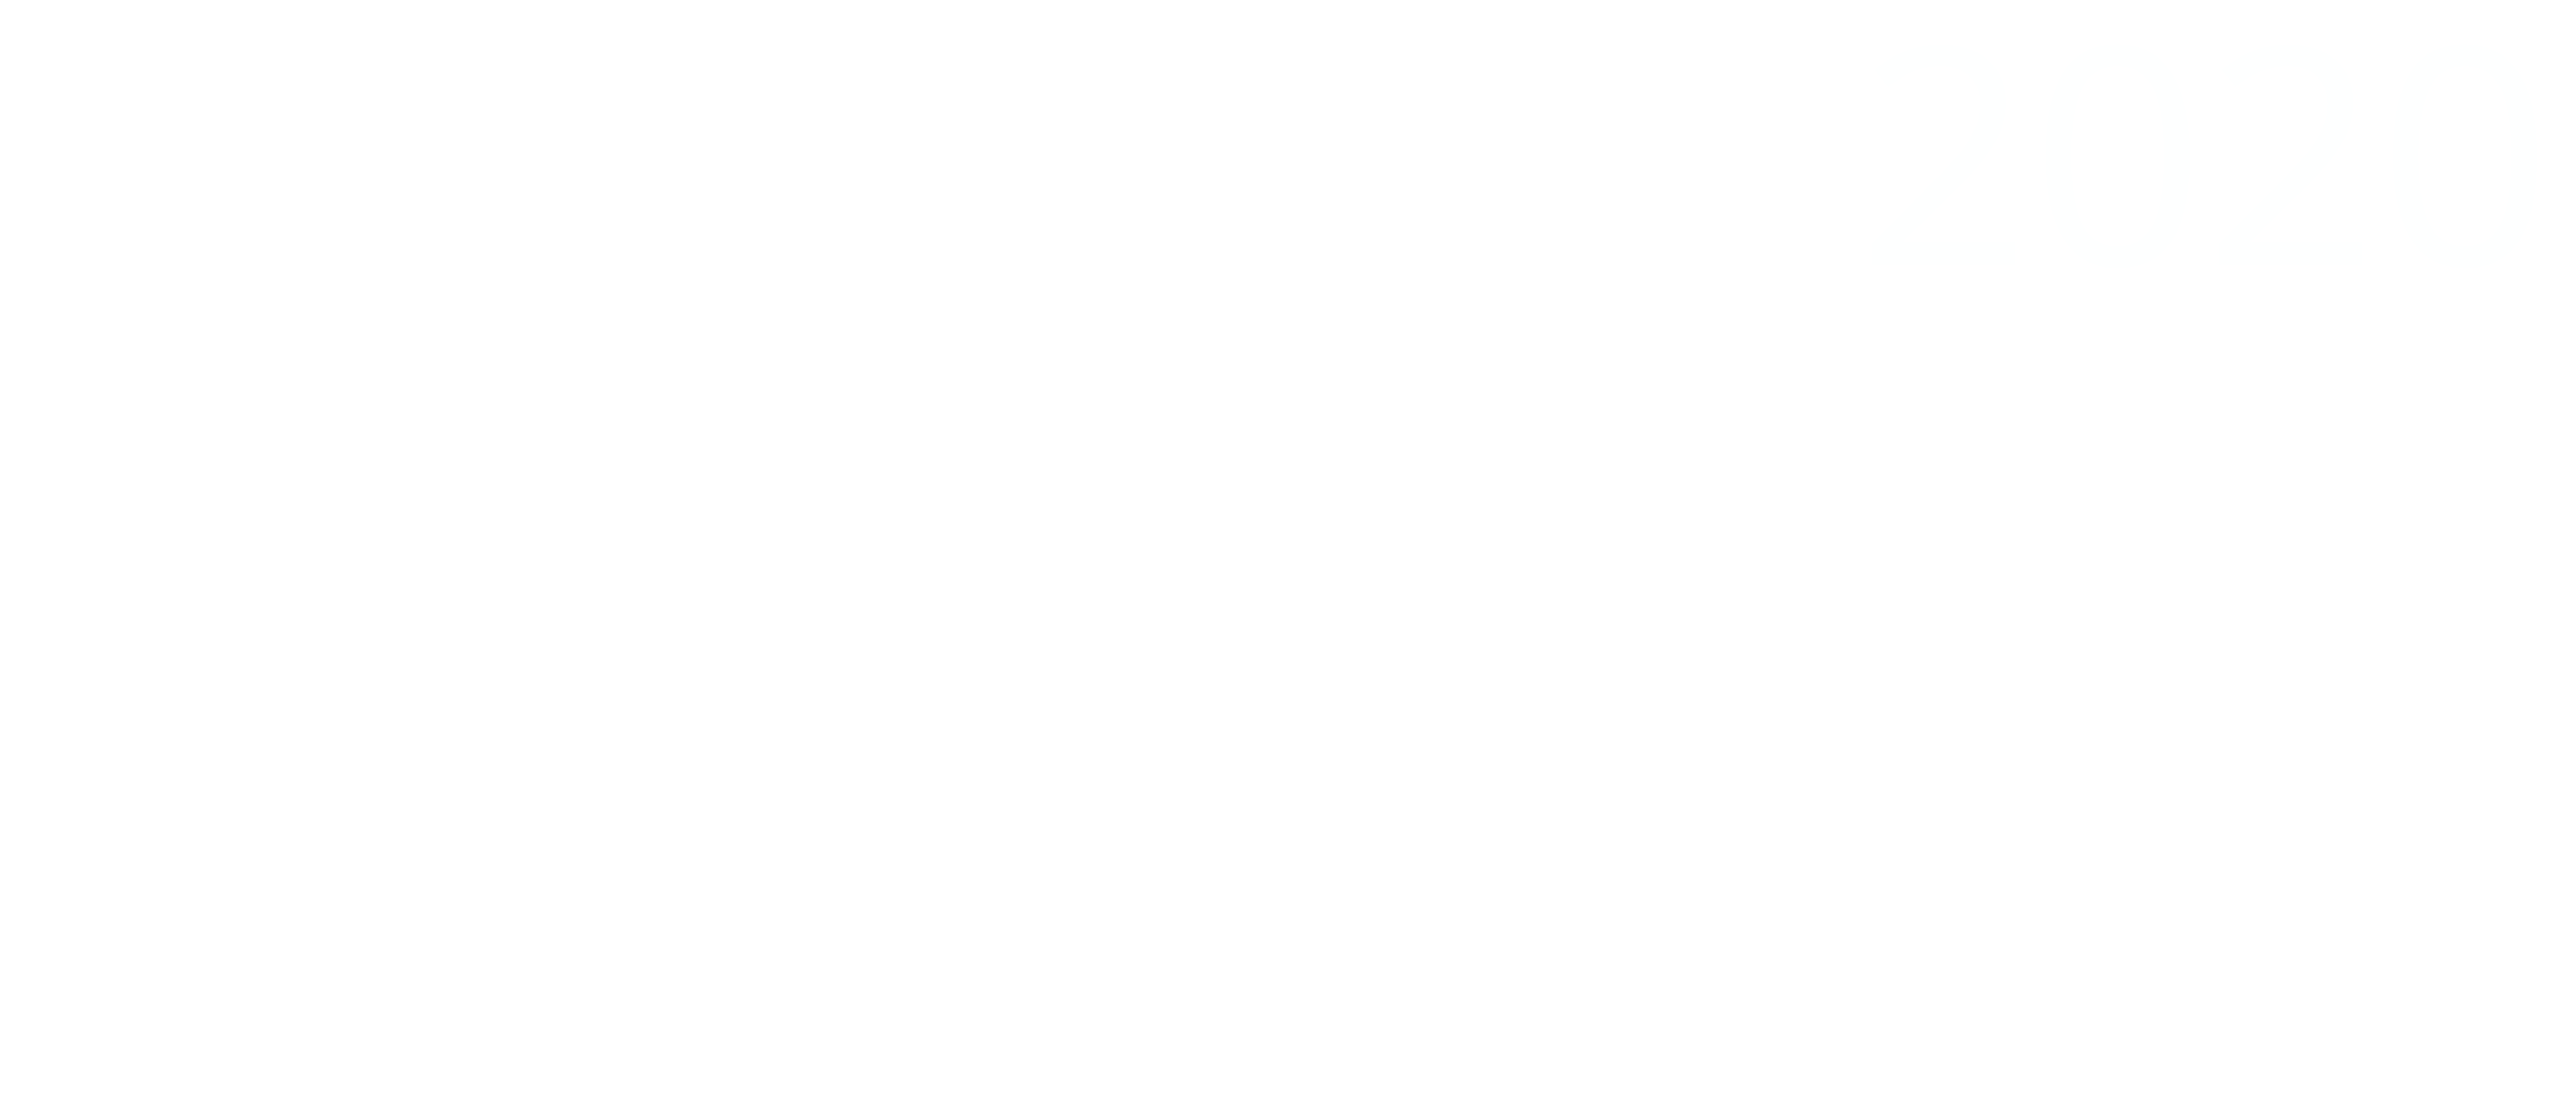 SBC Awards 2020 / Highly commended Services provider of the year is All-in Global